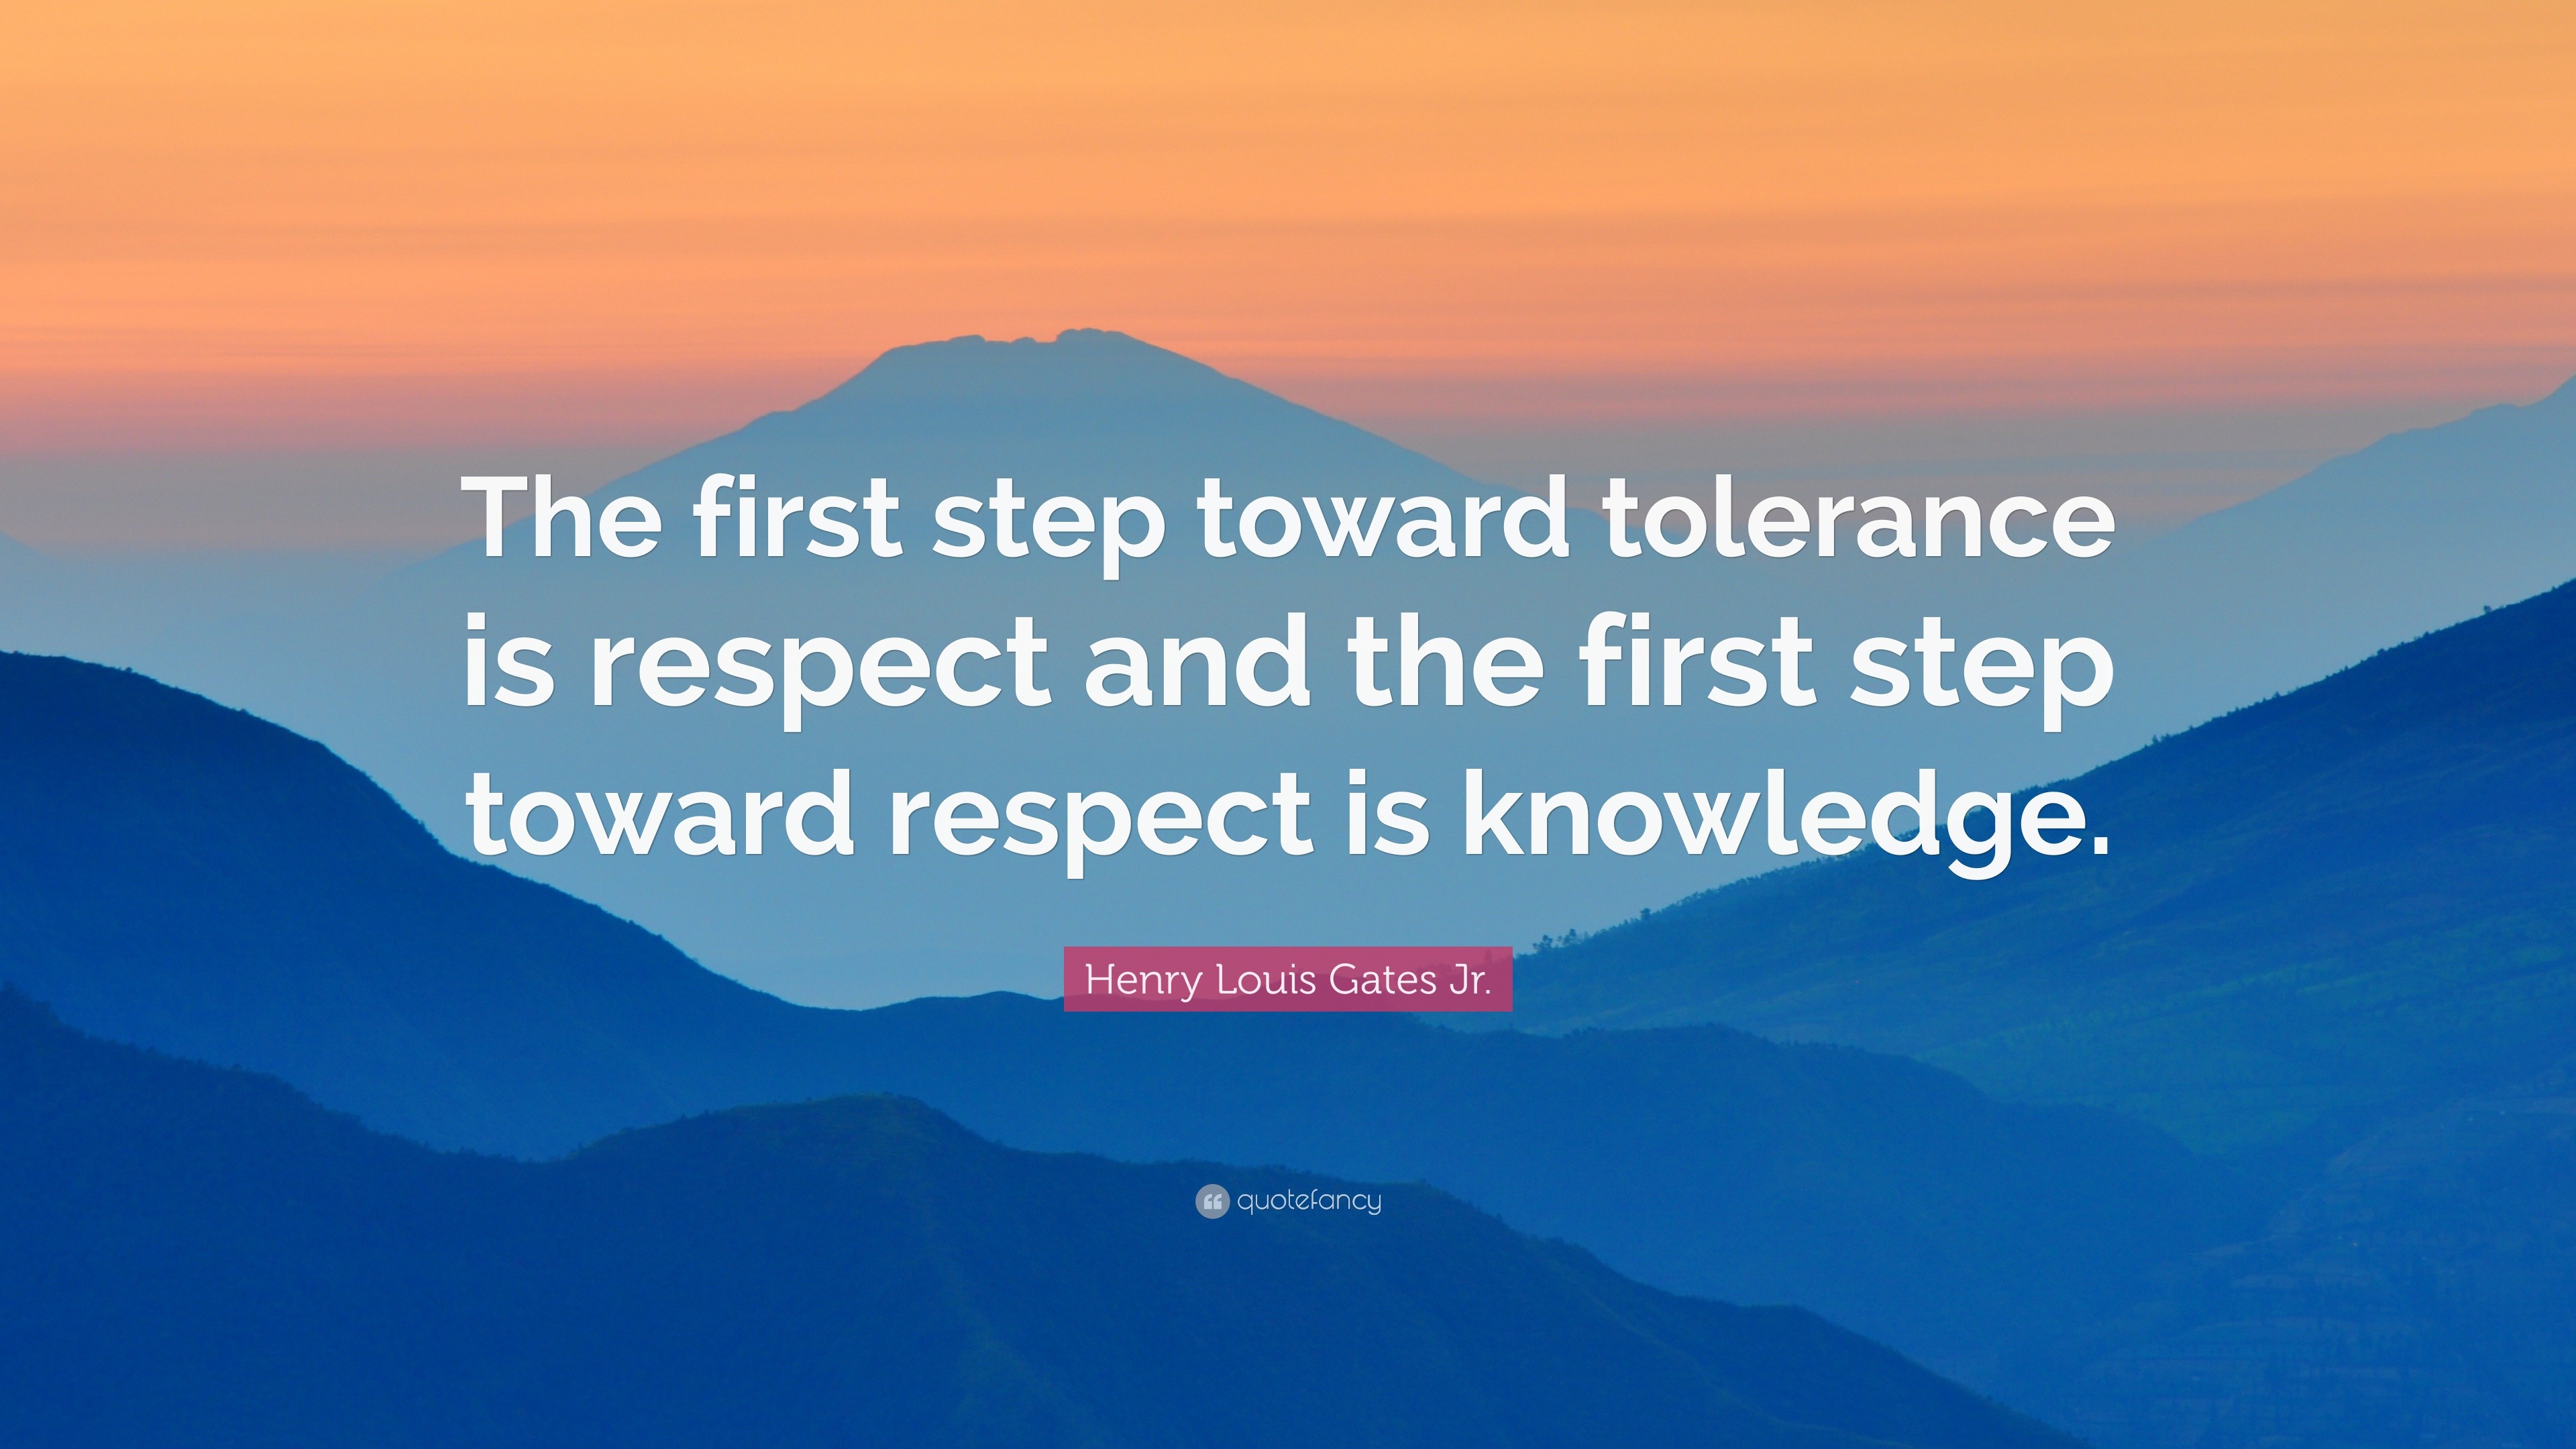 Henry Louis Gates Jr. Quote: “The first step toward tolerance is